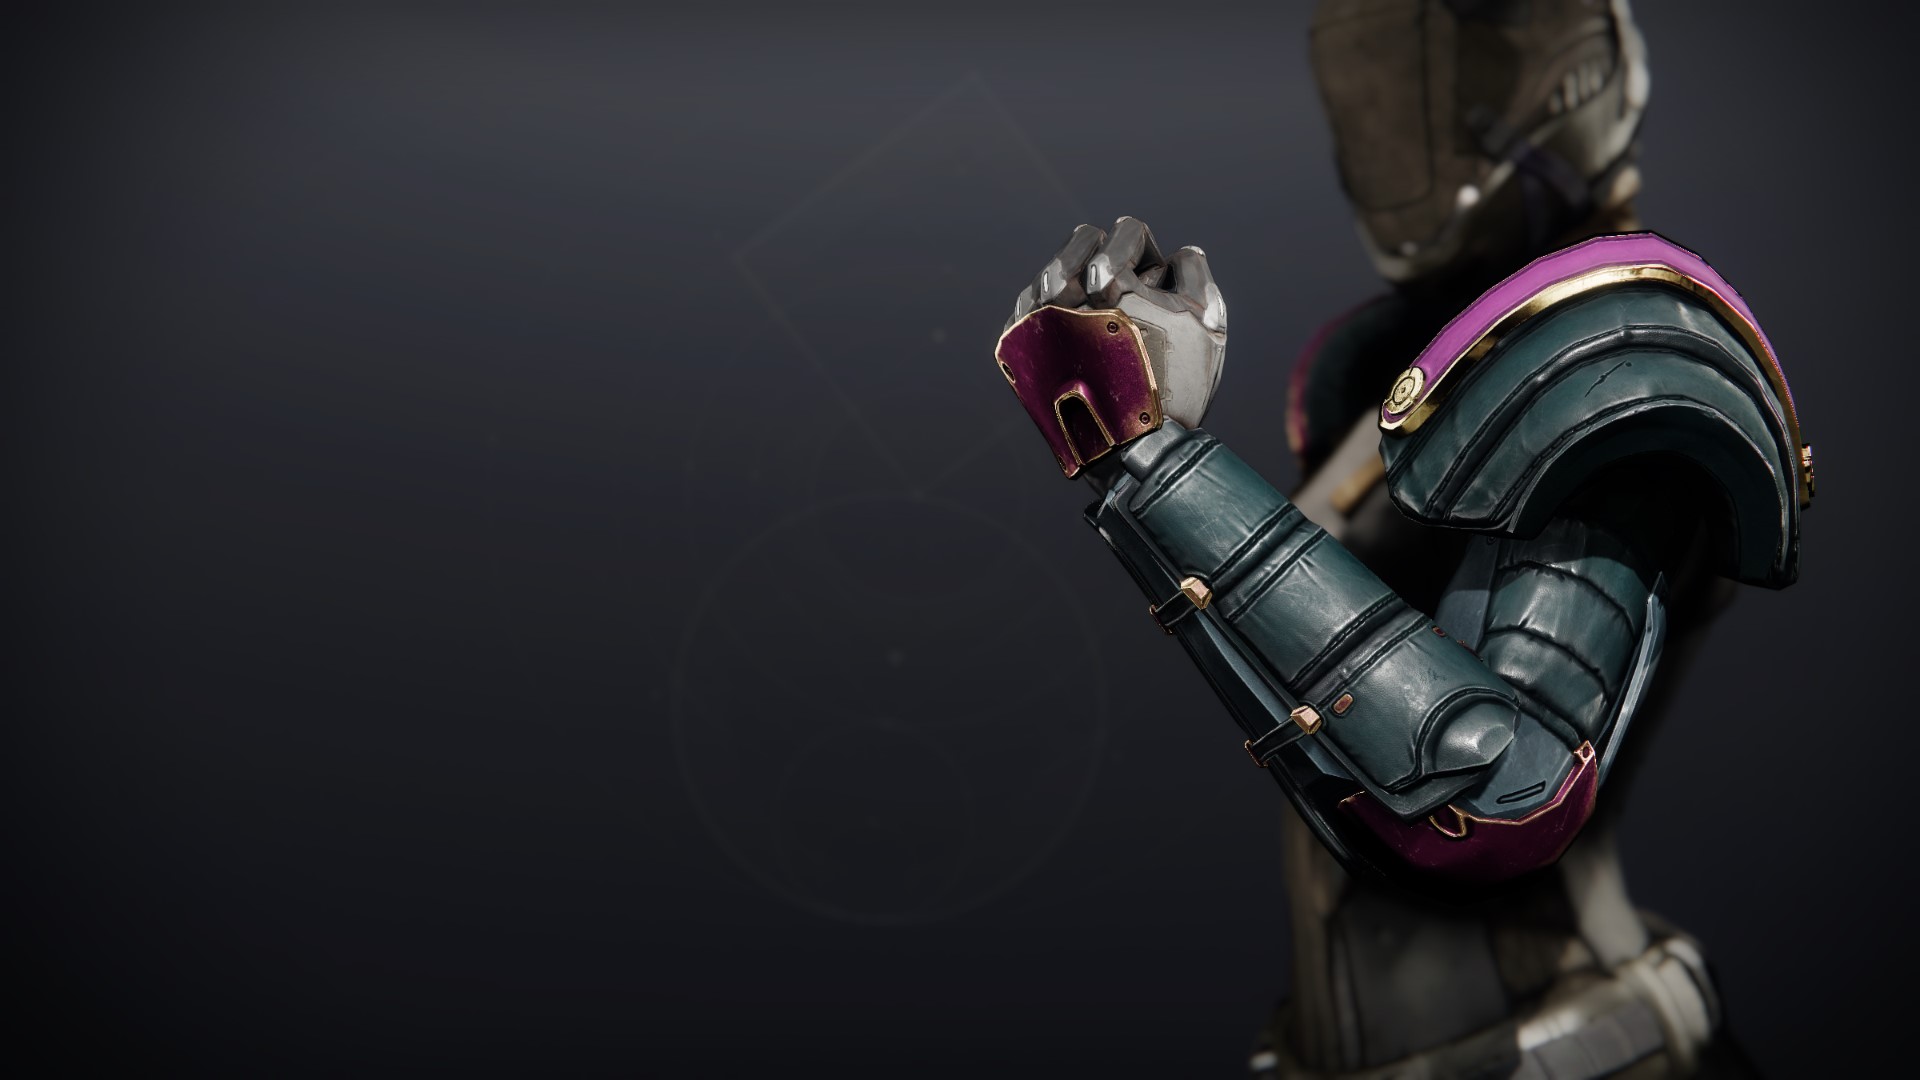 An in-game render of the Pathfinder's Gauntlets.